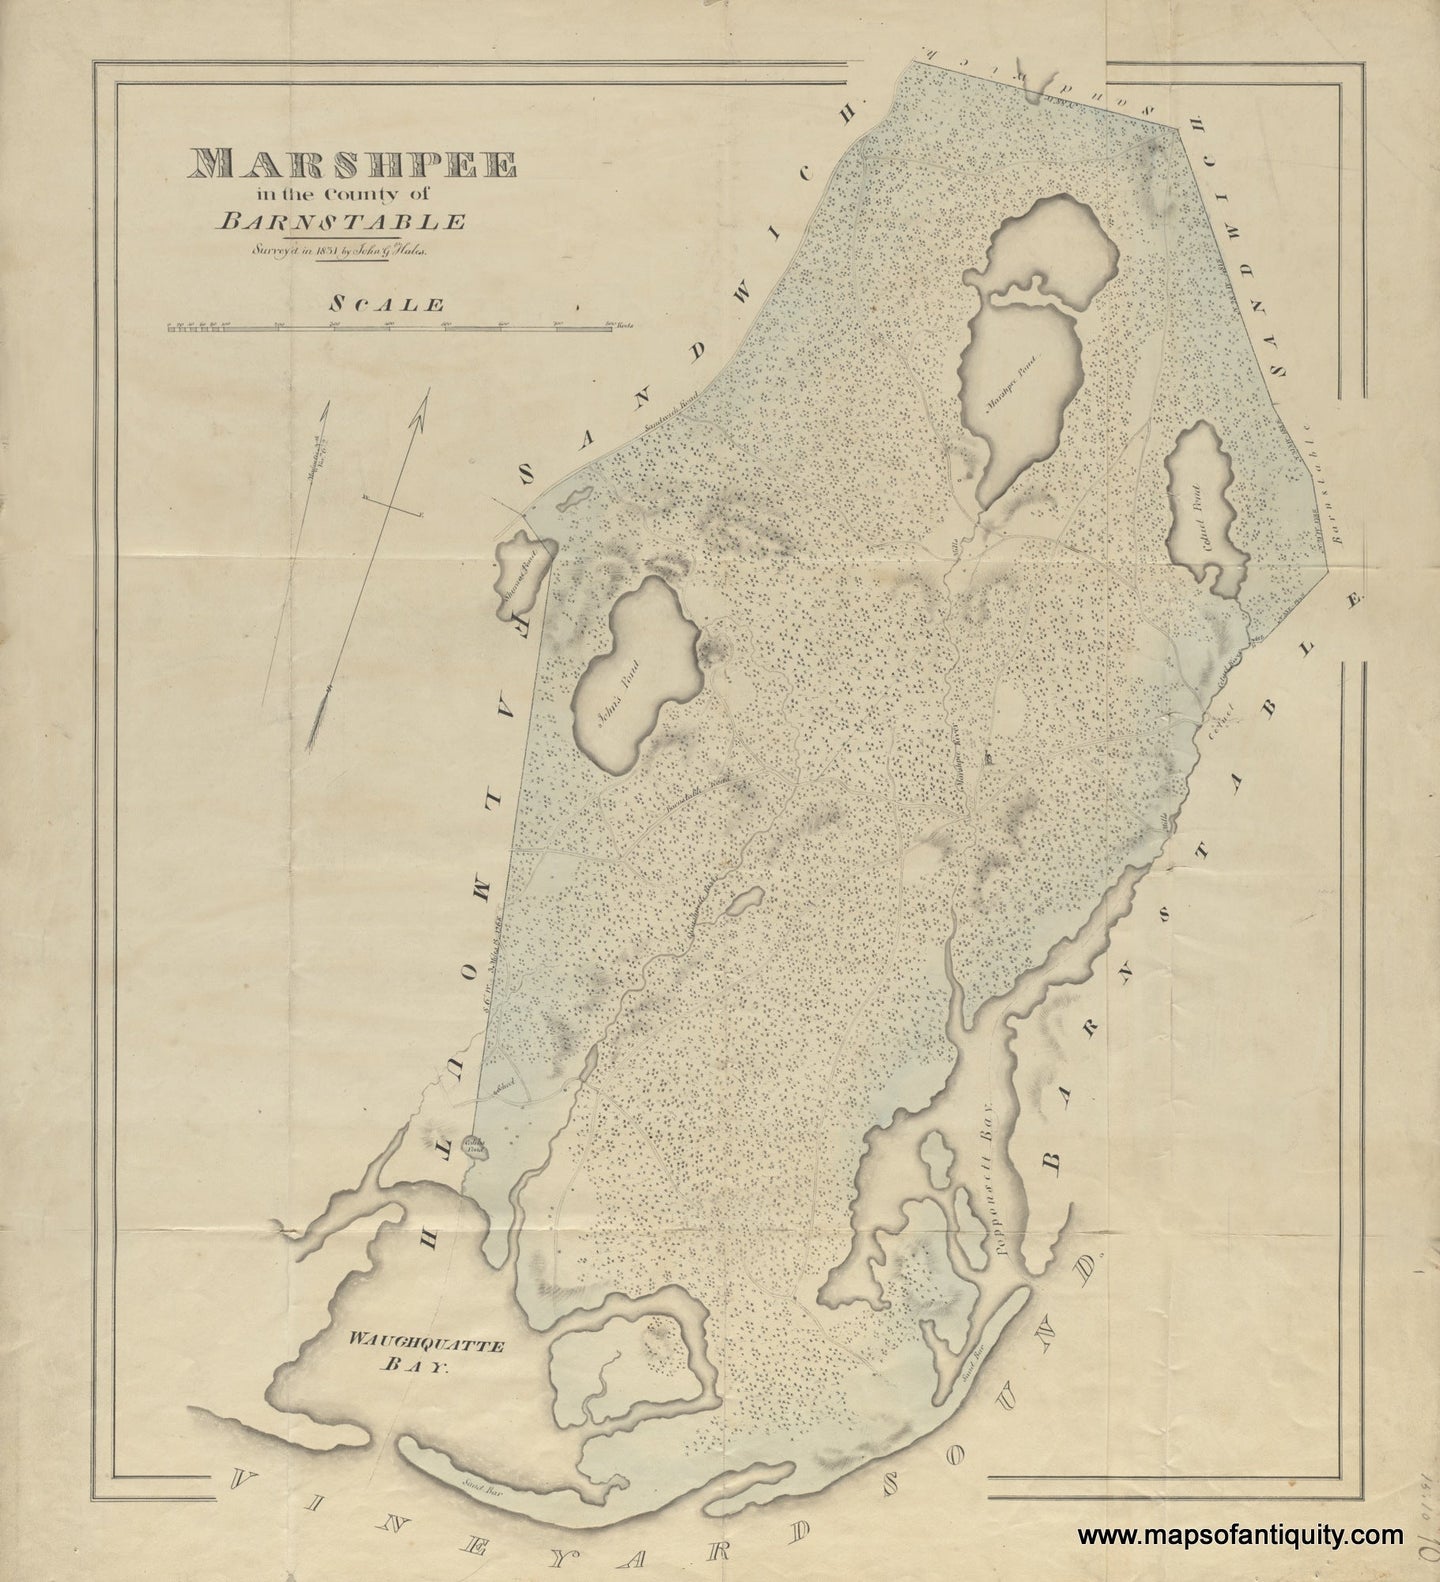 High-Quality-Giclee-Reproduction-Marshpee-in-the-County-of-Barnstable-1831---Maps-Of-Antiquity